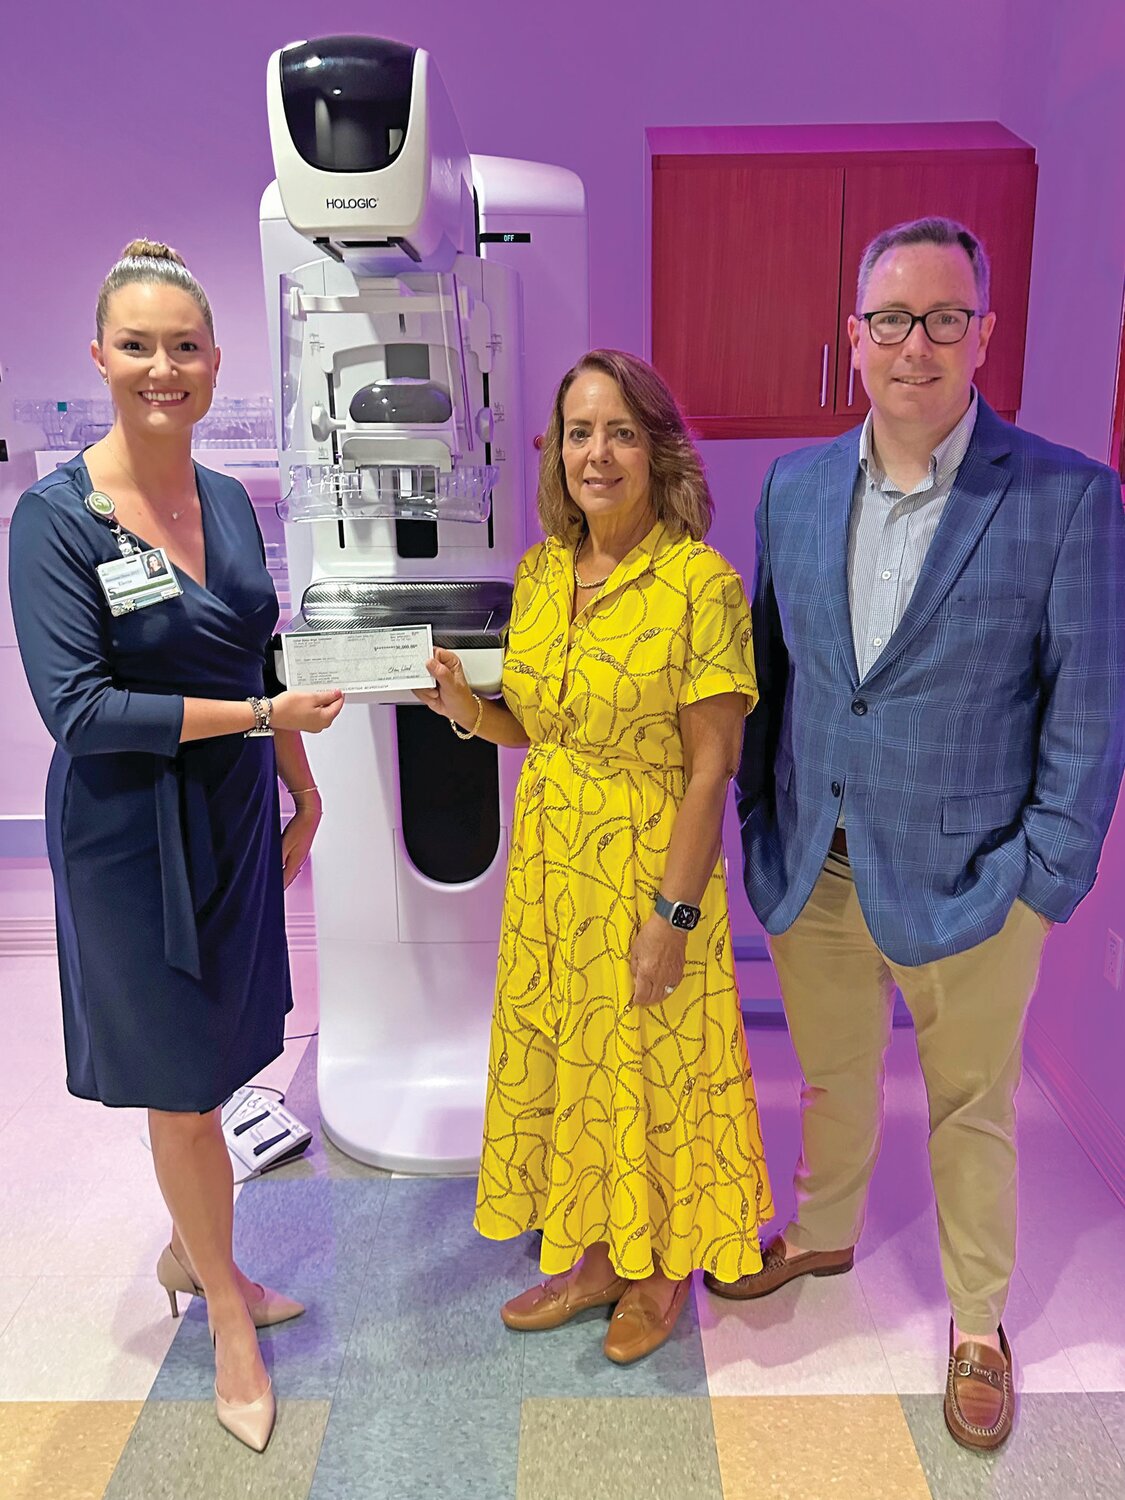 Elaine Wood, CFO U.S. Sugar and hospital authority board secretary/treasurer presents $30,000 check for new 3D Mammography machine to Electa Waddell, HRMC Foundation executive director, along with Ryan Duffy, HRMC Foundation board member and U.S. Sugar director of corporate communications